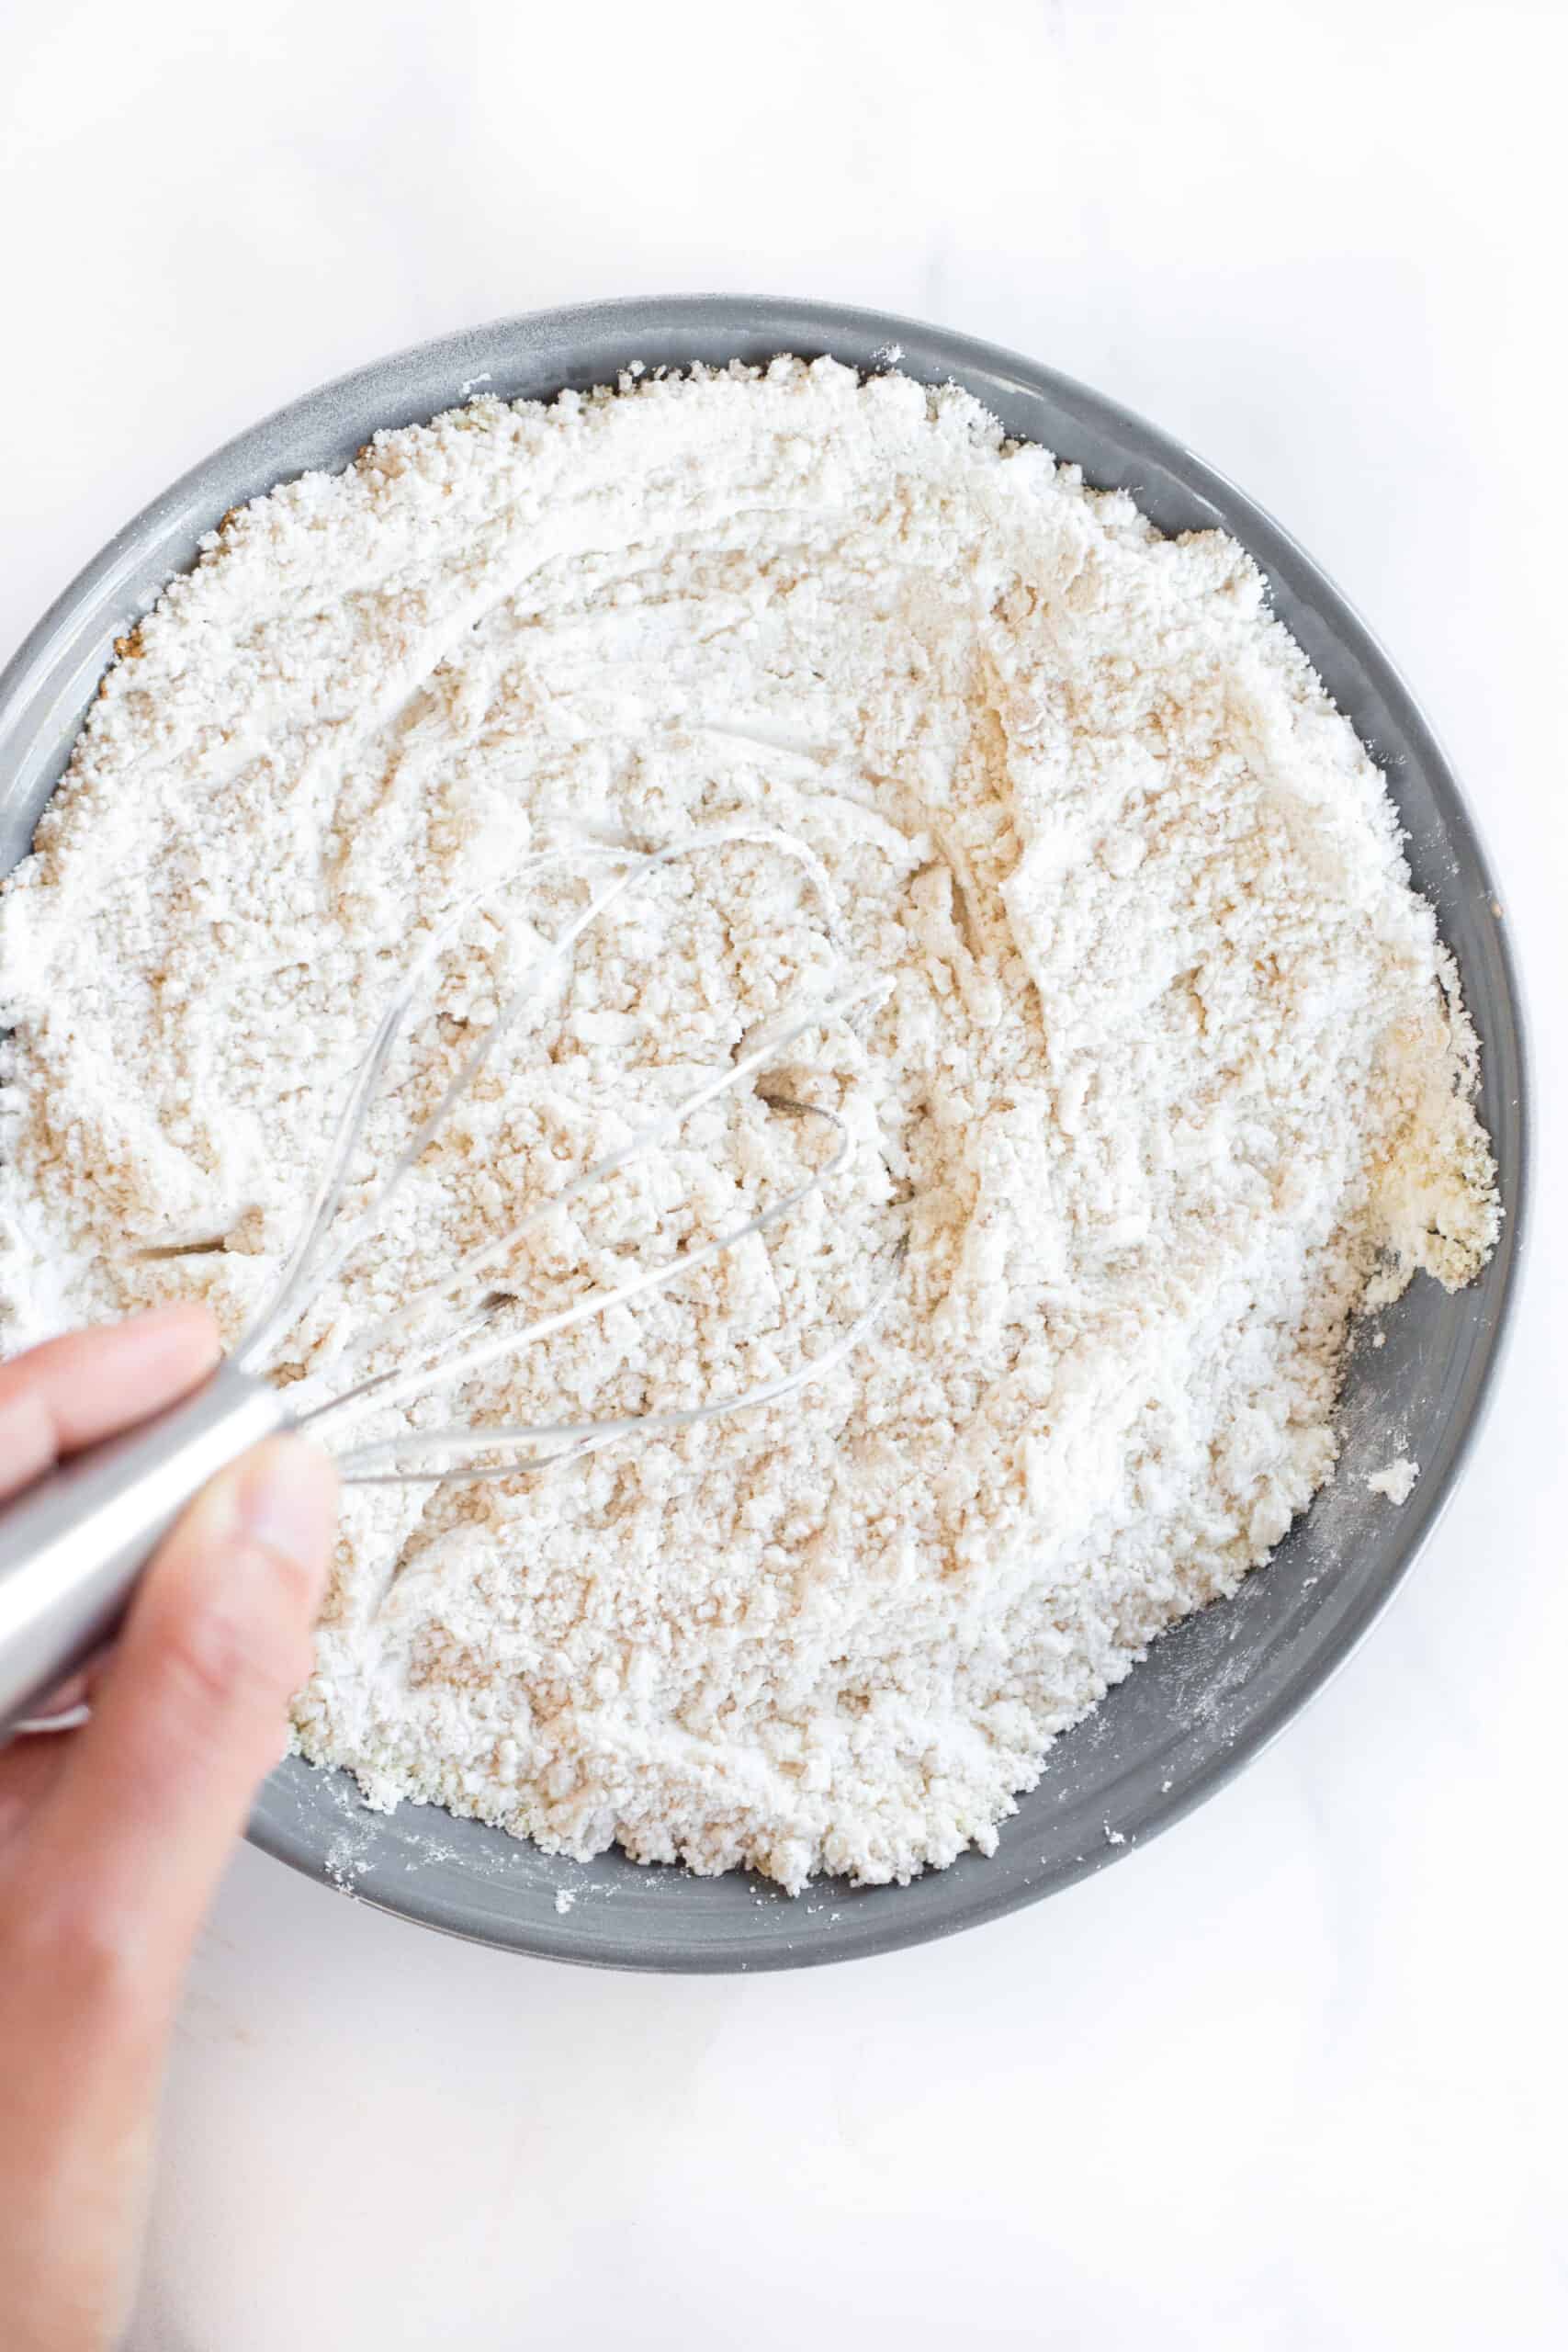 Whisking flour mixture in a grey bowl.